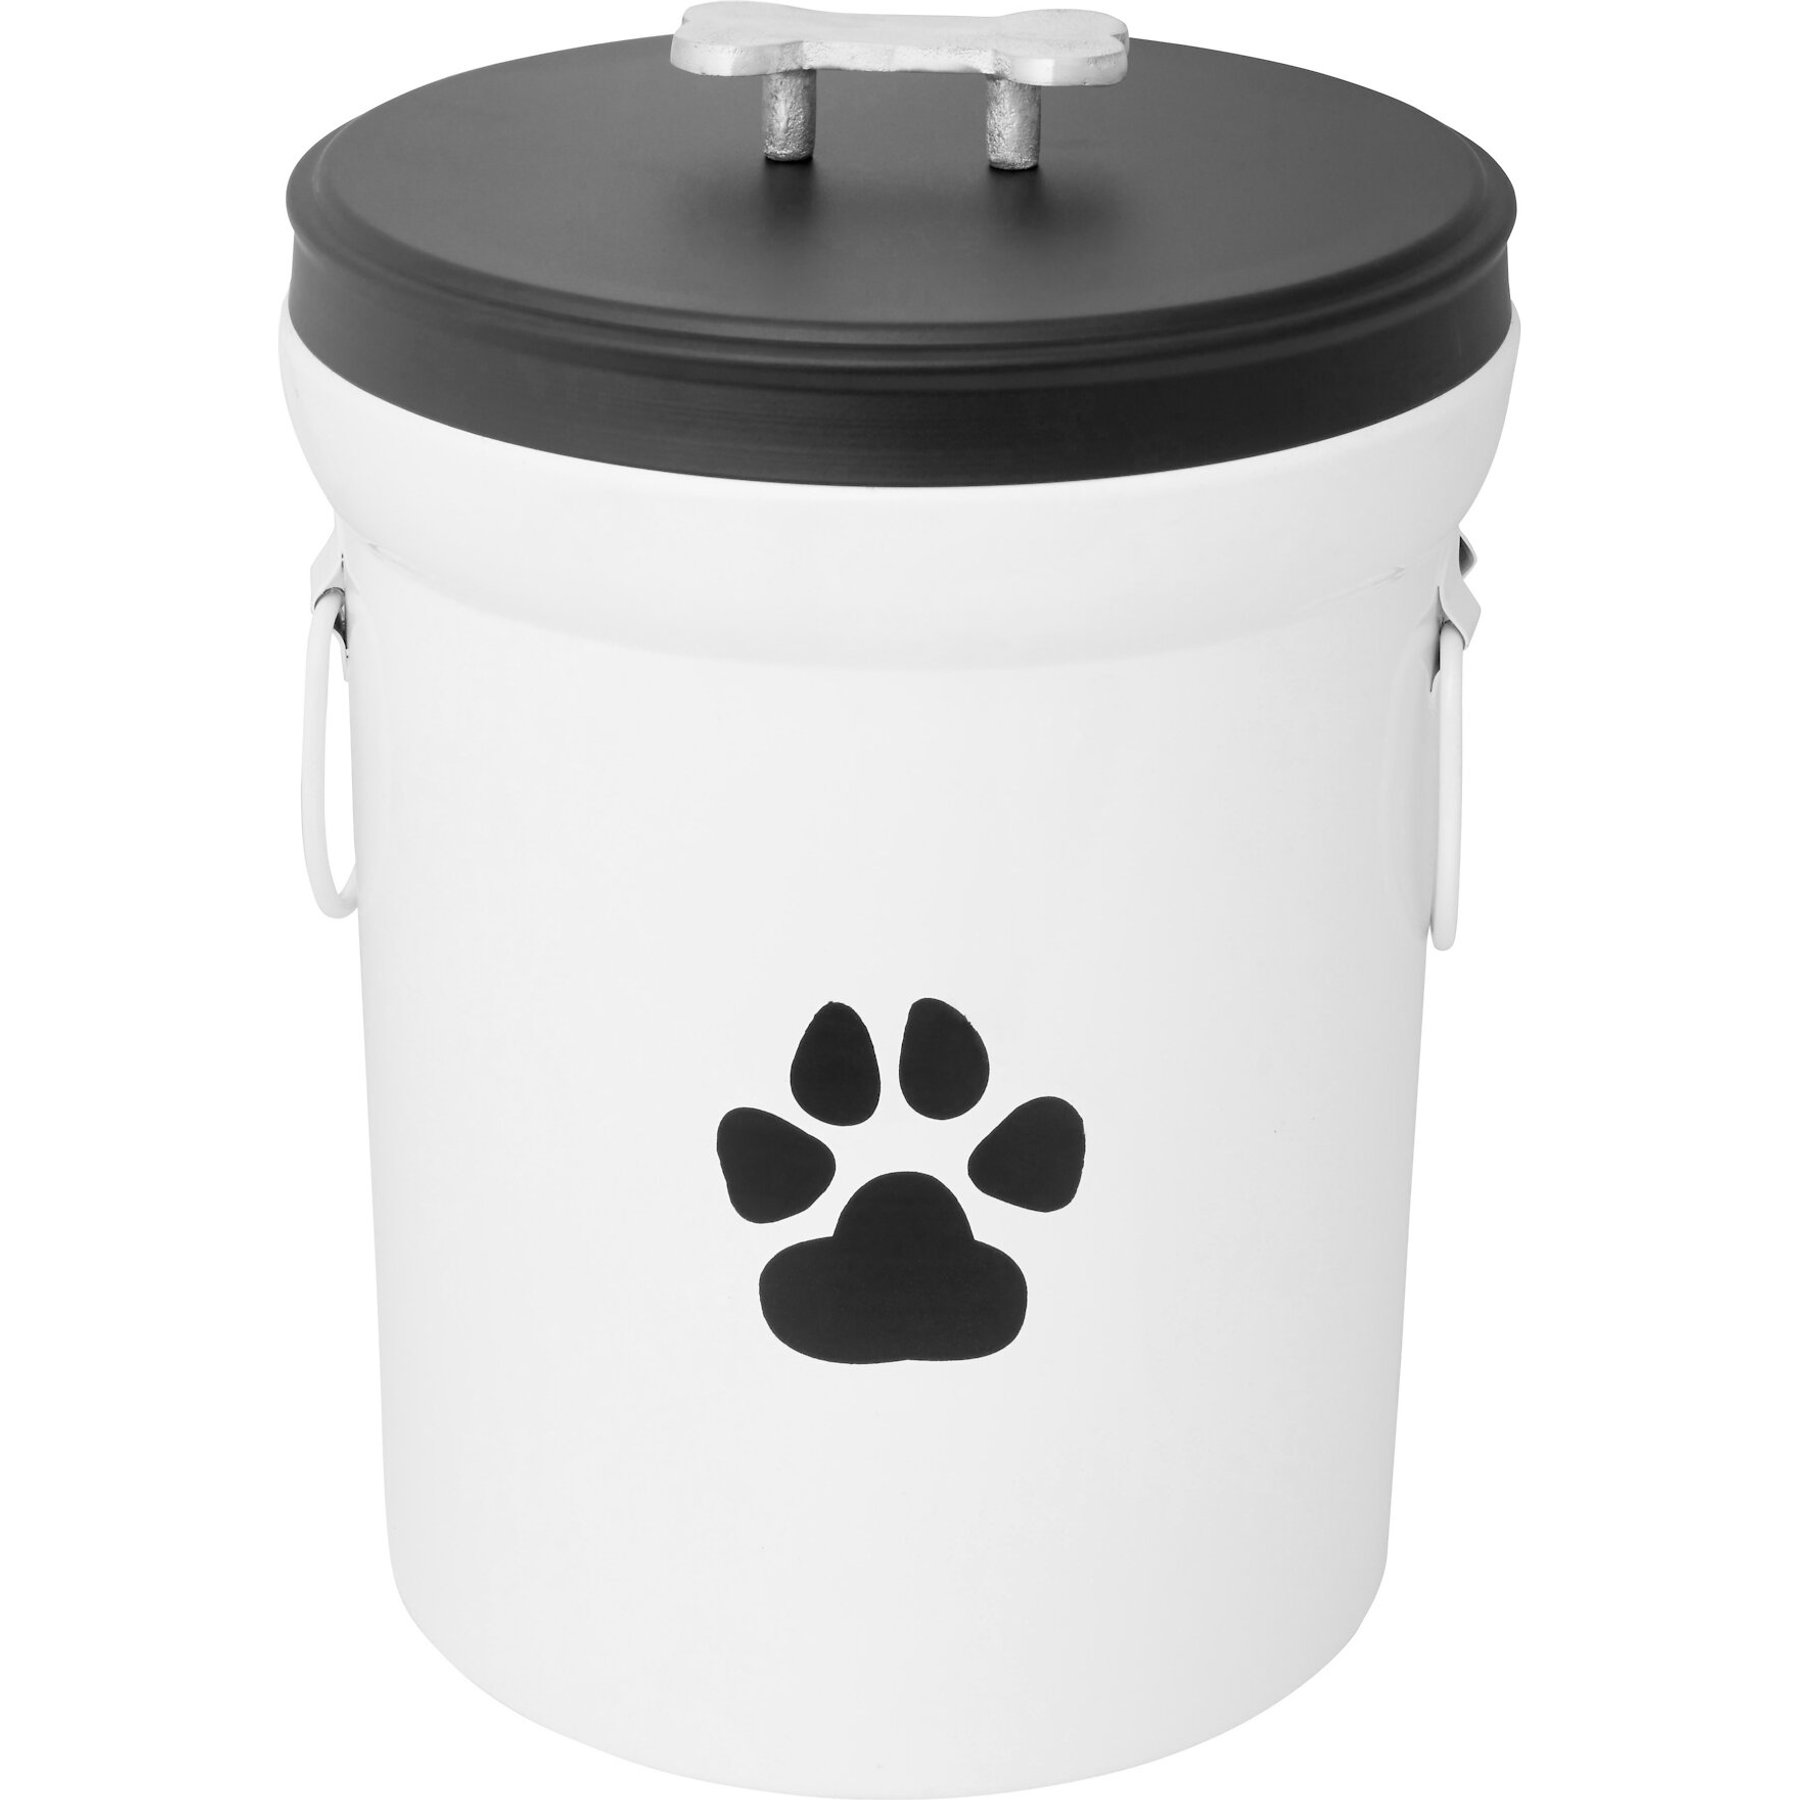 AGGFUCLS Dog Food Storage Container, Collapsible 11 to 25 LB Pet Food  Container, Food Containers for Dog， Cat Flour Sugar Plastic Leakproof  Sealable